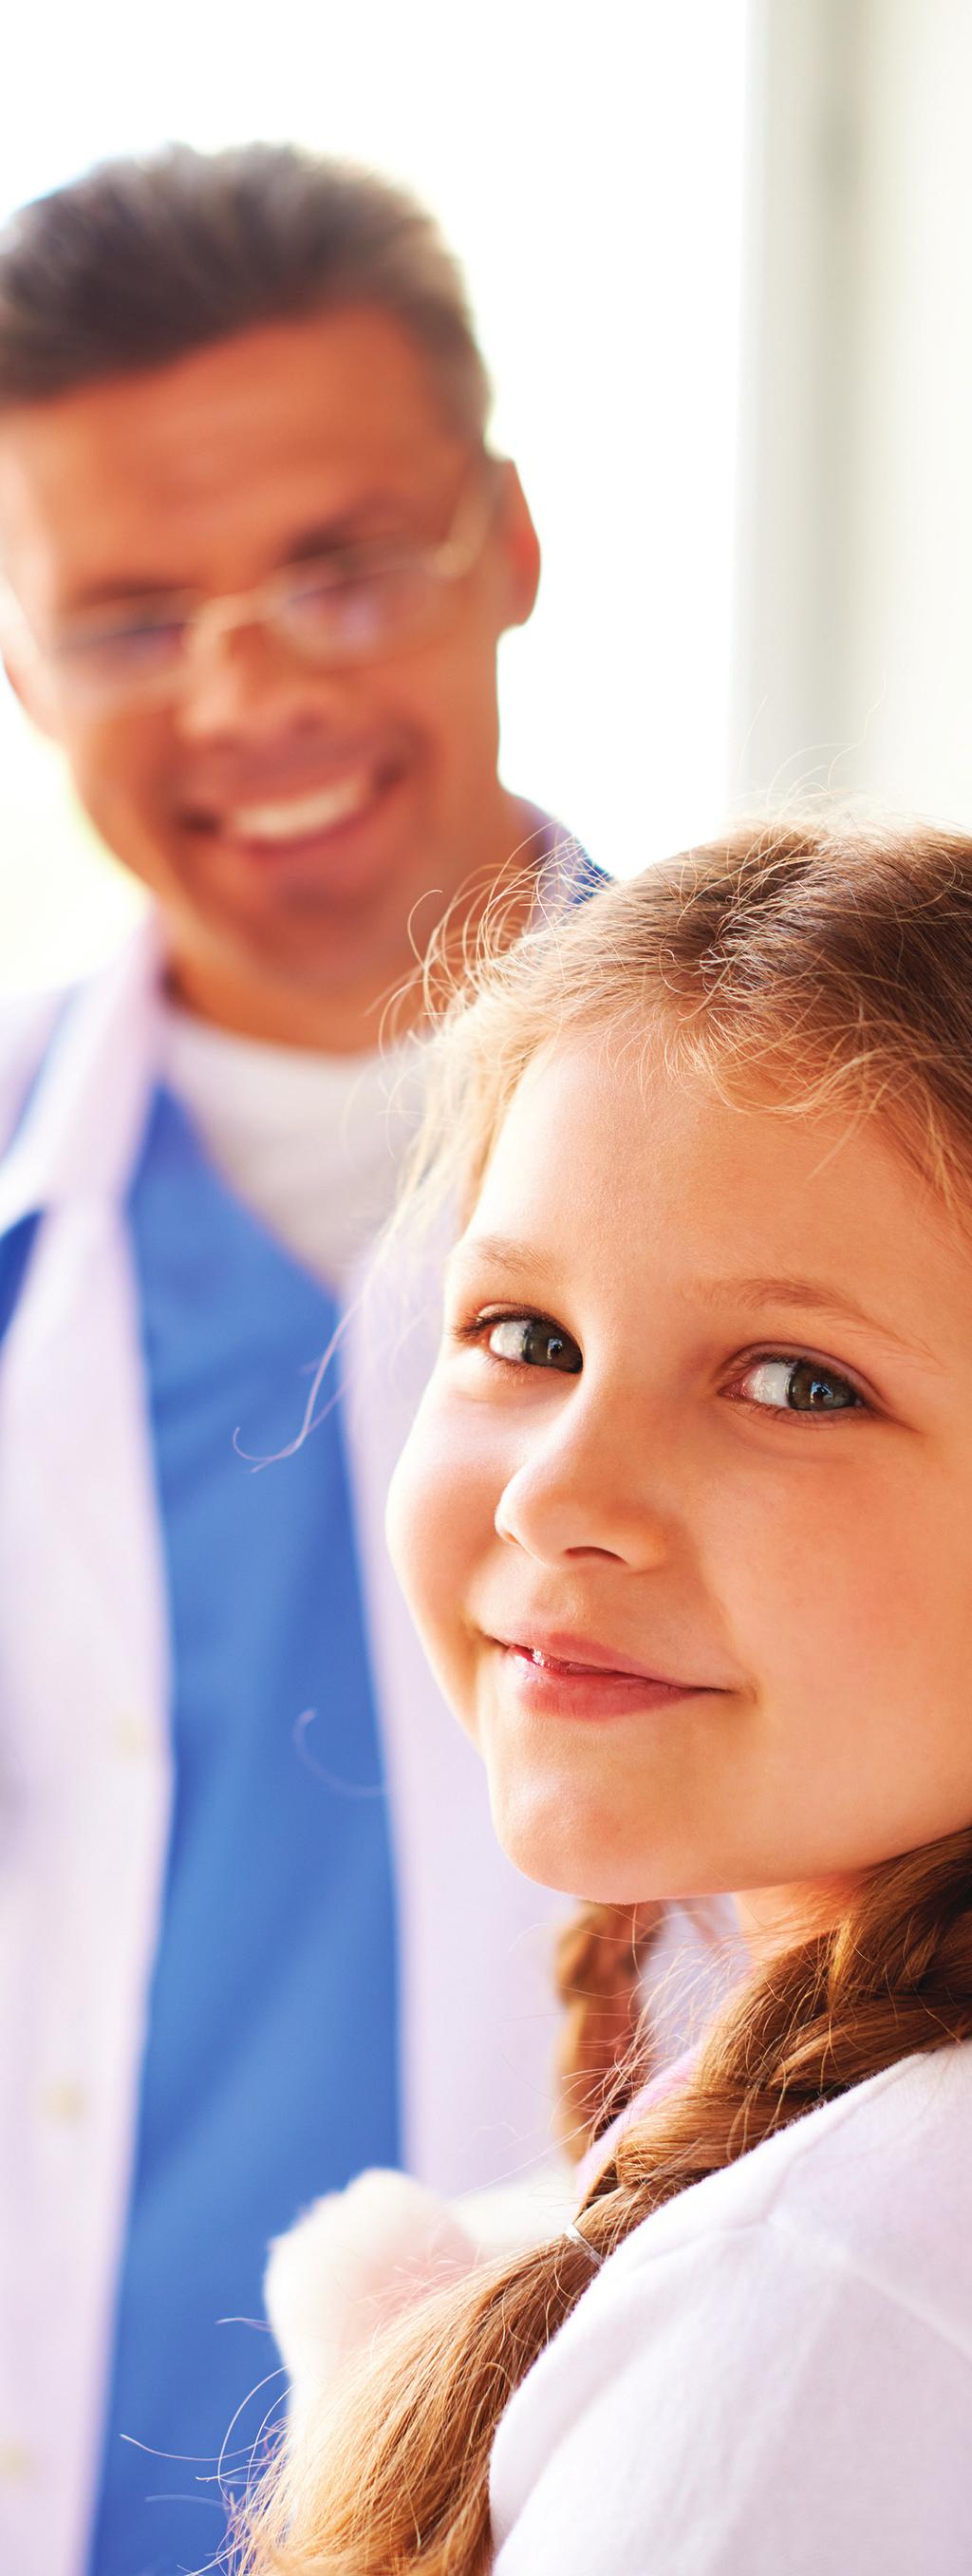 Diagnosis How is an ASD diagnosed? An ASD is most commonly noticed during a routine medical checkup when a physician hears an additional sound in the heart (a murmur).